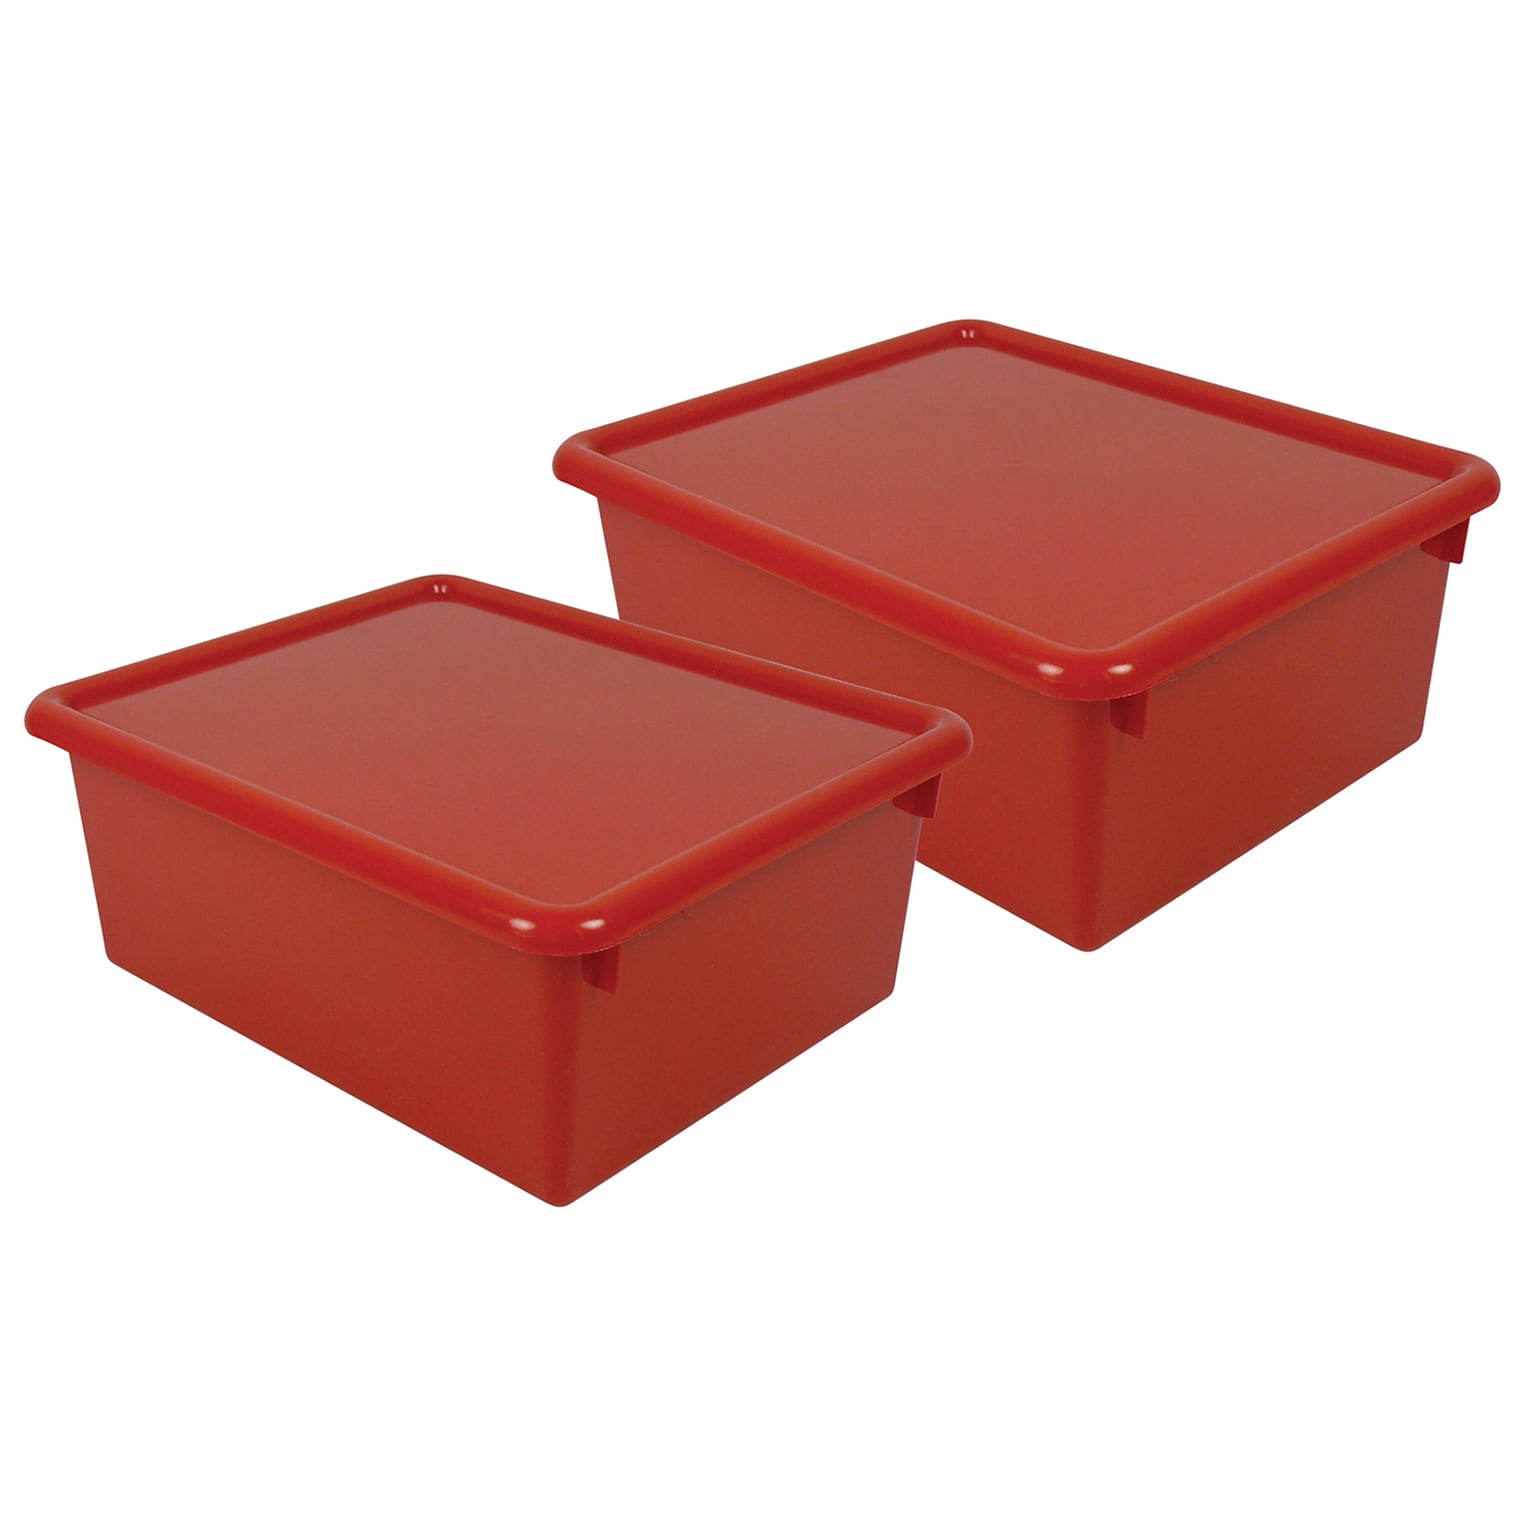 Romanoff Plastic Stowaway 5 Letter Box with Lid, Red, Pack of 2 (ROM16002-2)